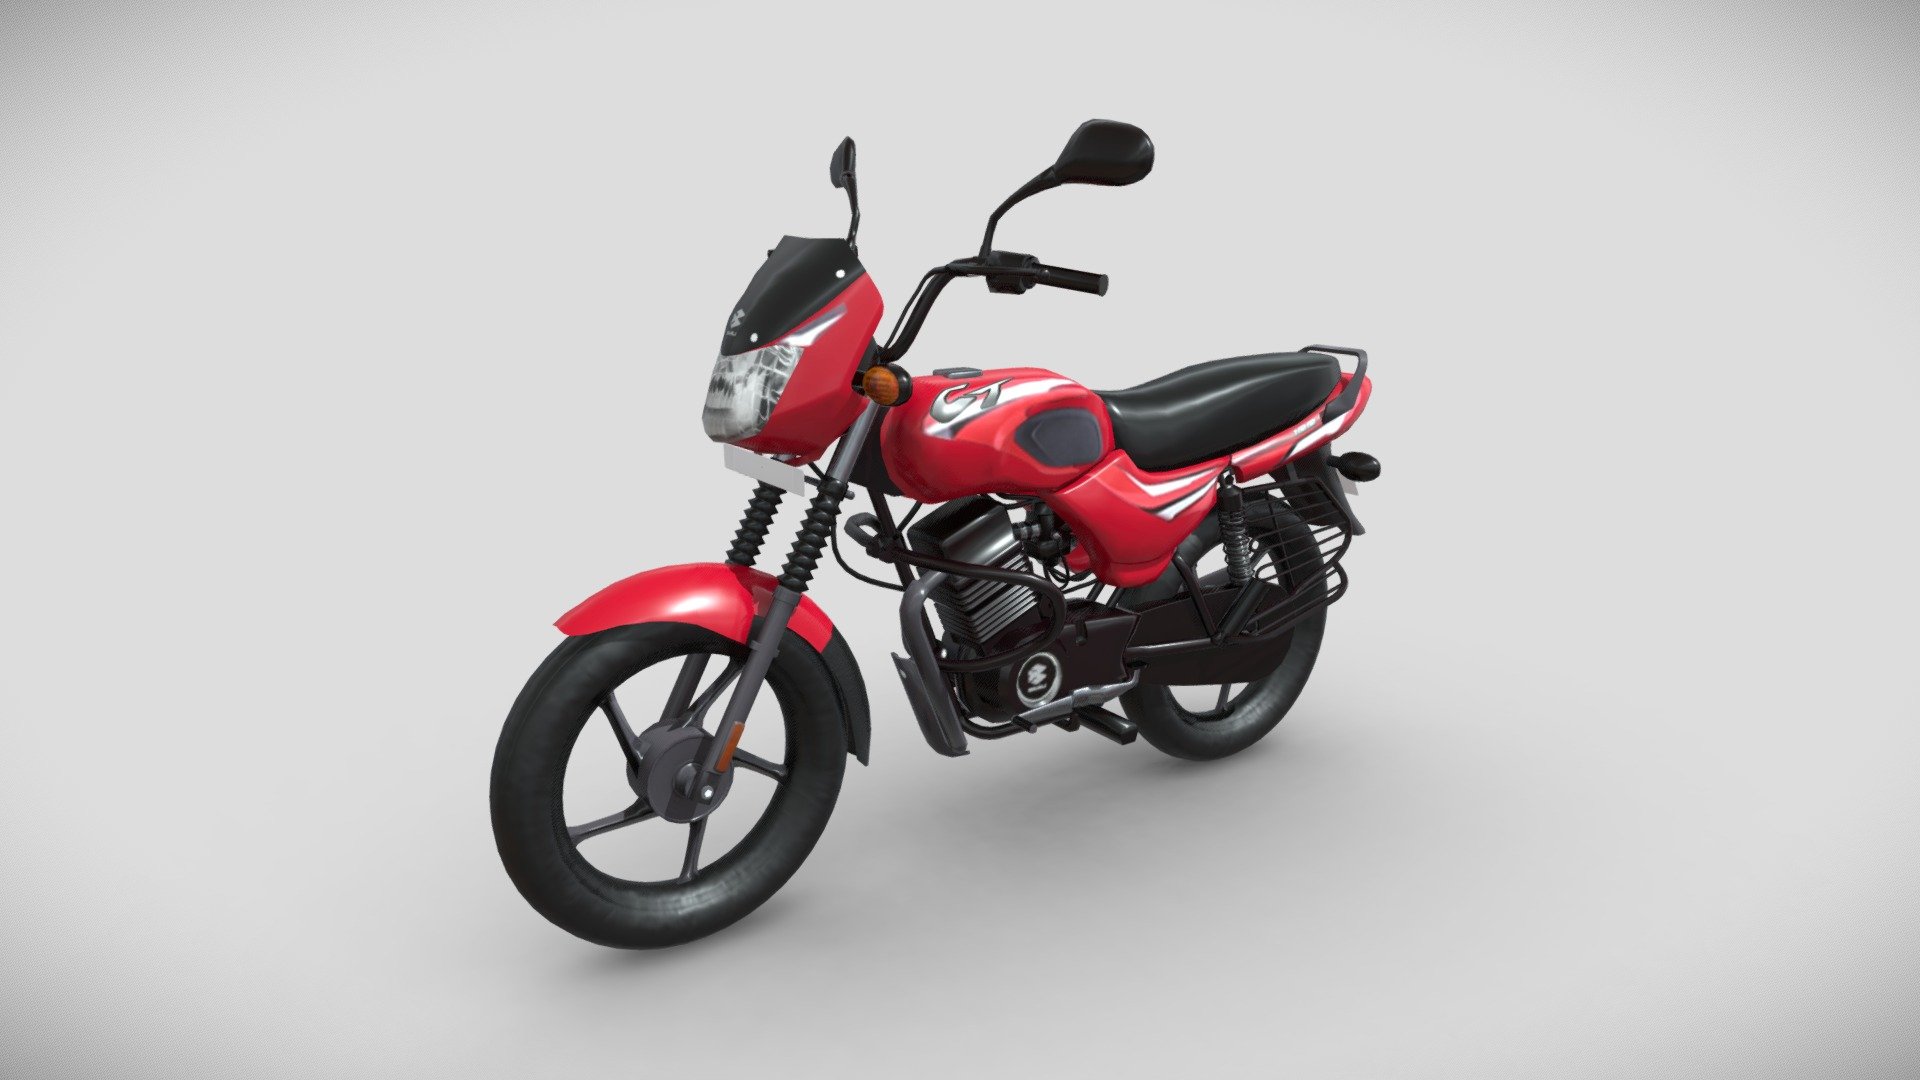 Introducing the Bajaj CT 100 3D model.
The Bajaj CT 100 is a popular entry-level motorcycle manufactured by Bajaj Auto, an Indian automobile and motorcycle manufacturer.
Model Type: Polygonal
Polygons: 20,332
Vertices: 20,844
Formats available: Maya ASCII 2018, Maya Binary 2018, FBX , OBJ
Textures: Color, Normal, Height, Metallic, Roughness, and Opacity maps
Texture Resolution: 2048 X 2018 pixels
Due to its low polygon count, the model is also suitable for use in low-end or mobile applications where performance is a critical factor.
The model is compatible with a variety of 3D software and can be easily integrated into different platforms.
So, it's the perfect addition to your collection.
I plan on making more bikes in the future.

Hope you like it! - Bajaj CT 100 - Buy Royalty Free 3D model by Bhavik_Suthar 3d model